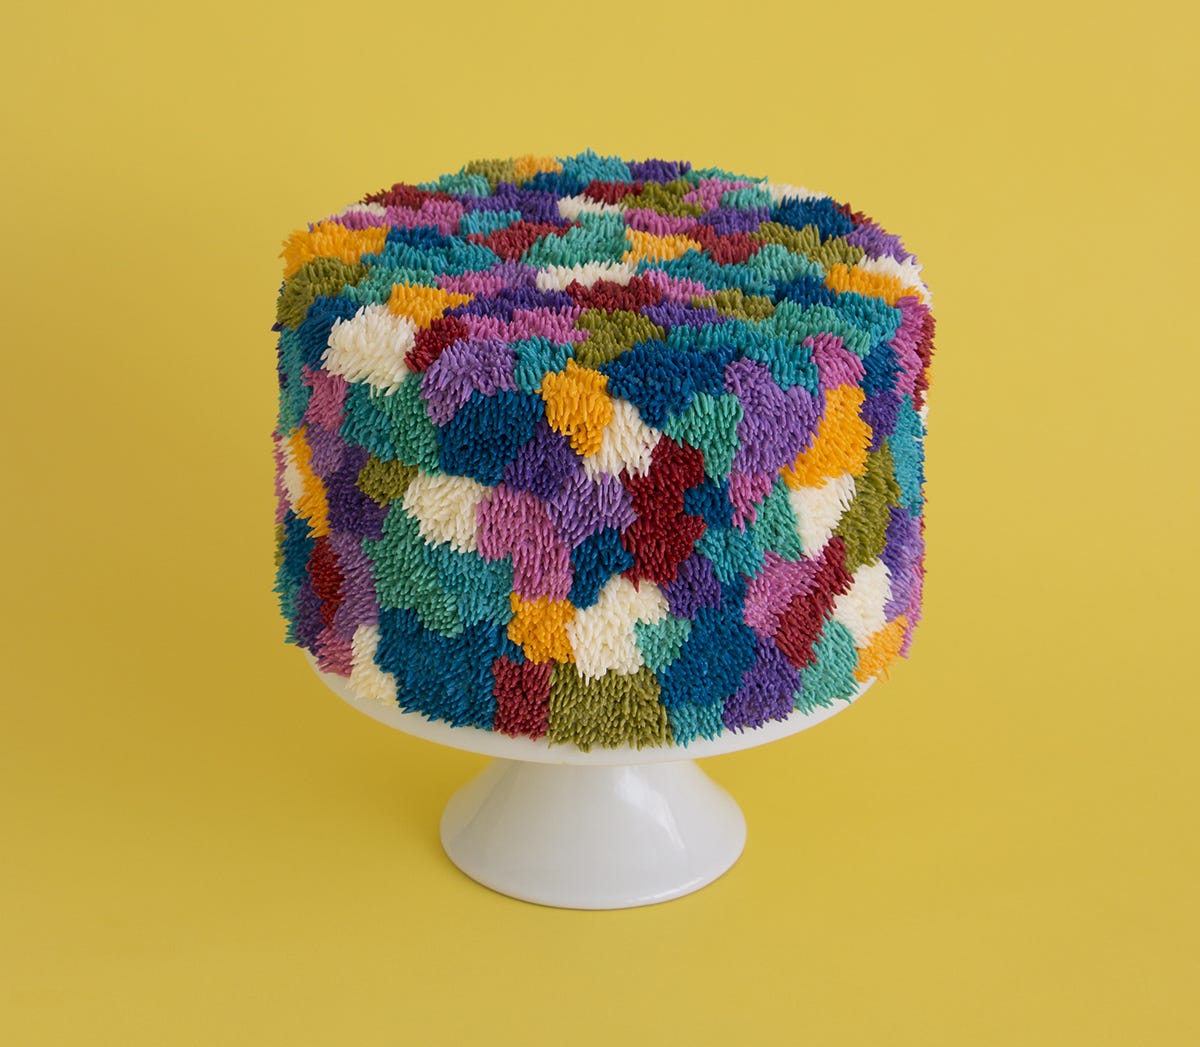 Cake frosted to resemble multi-colored patches of shag carpet.